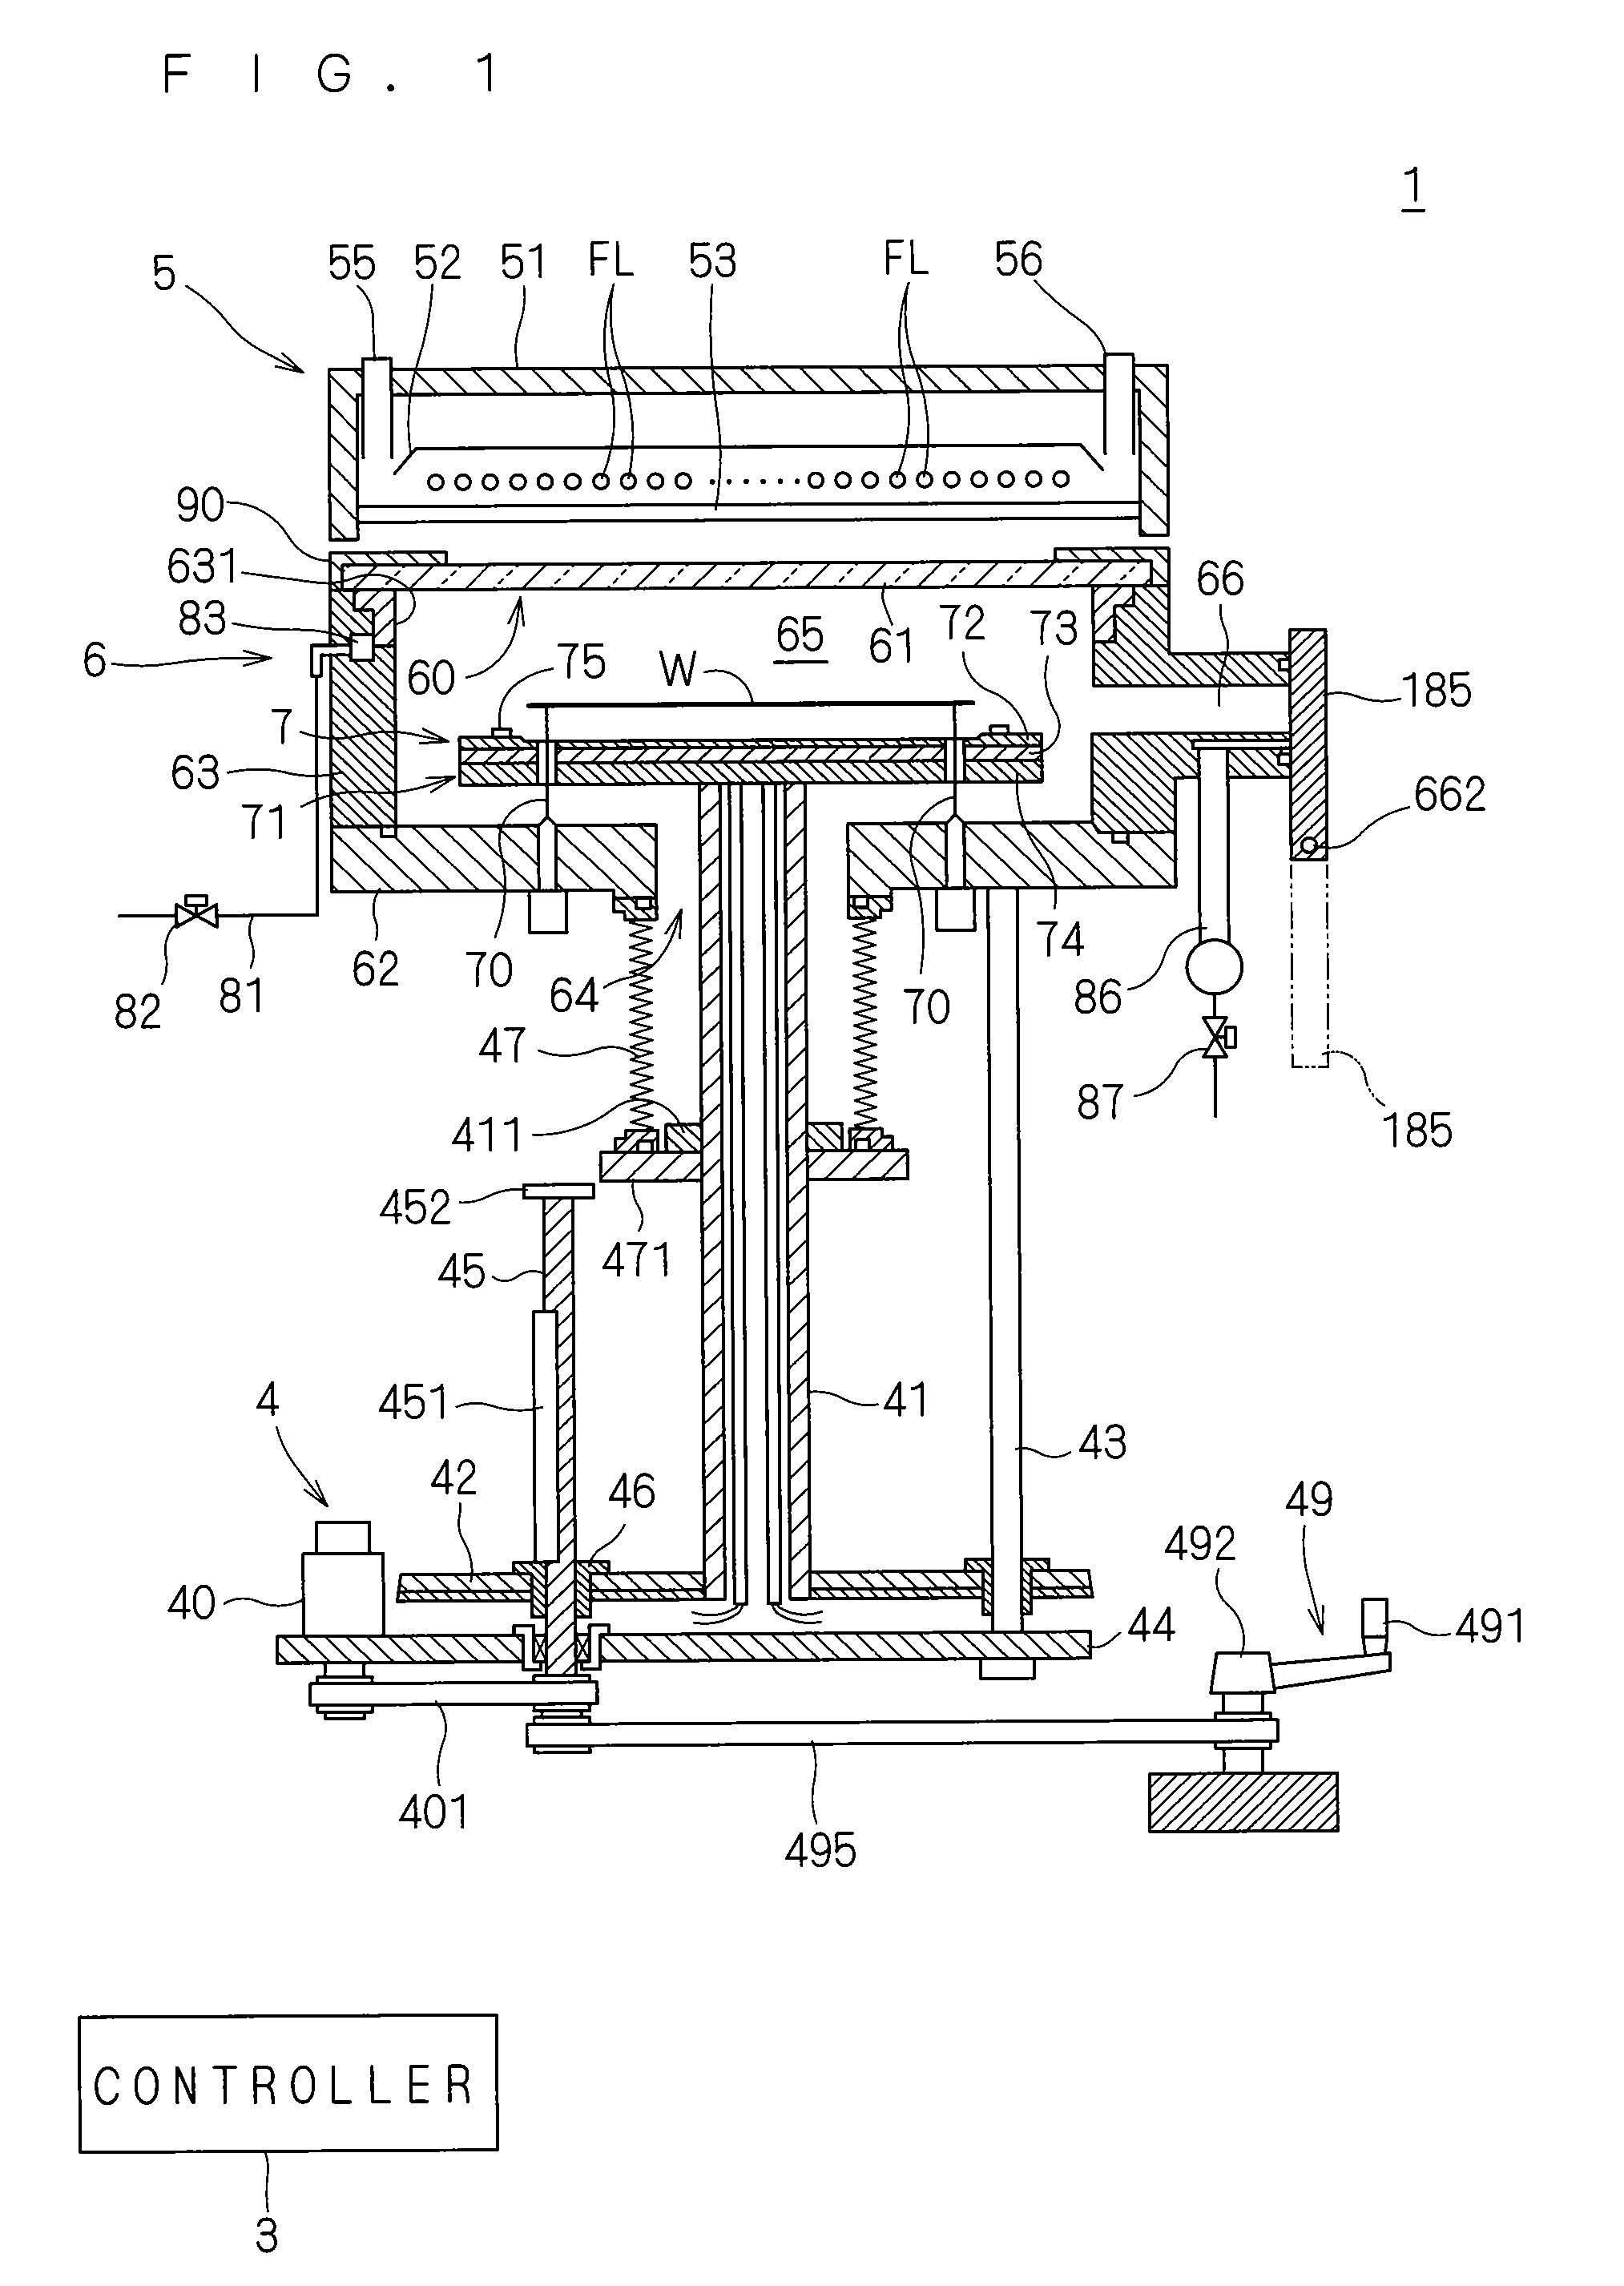 Heat treatment apparatus and method for heating substrate by light irradiation